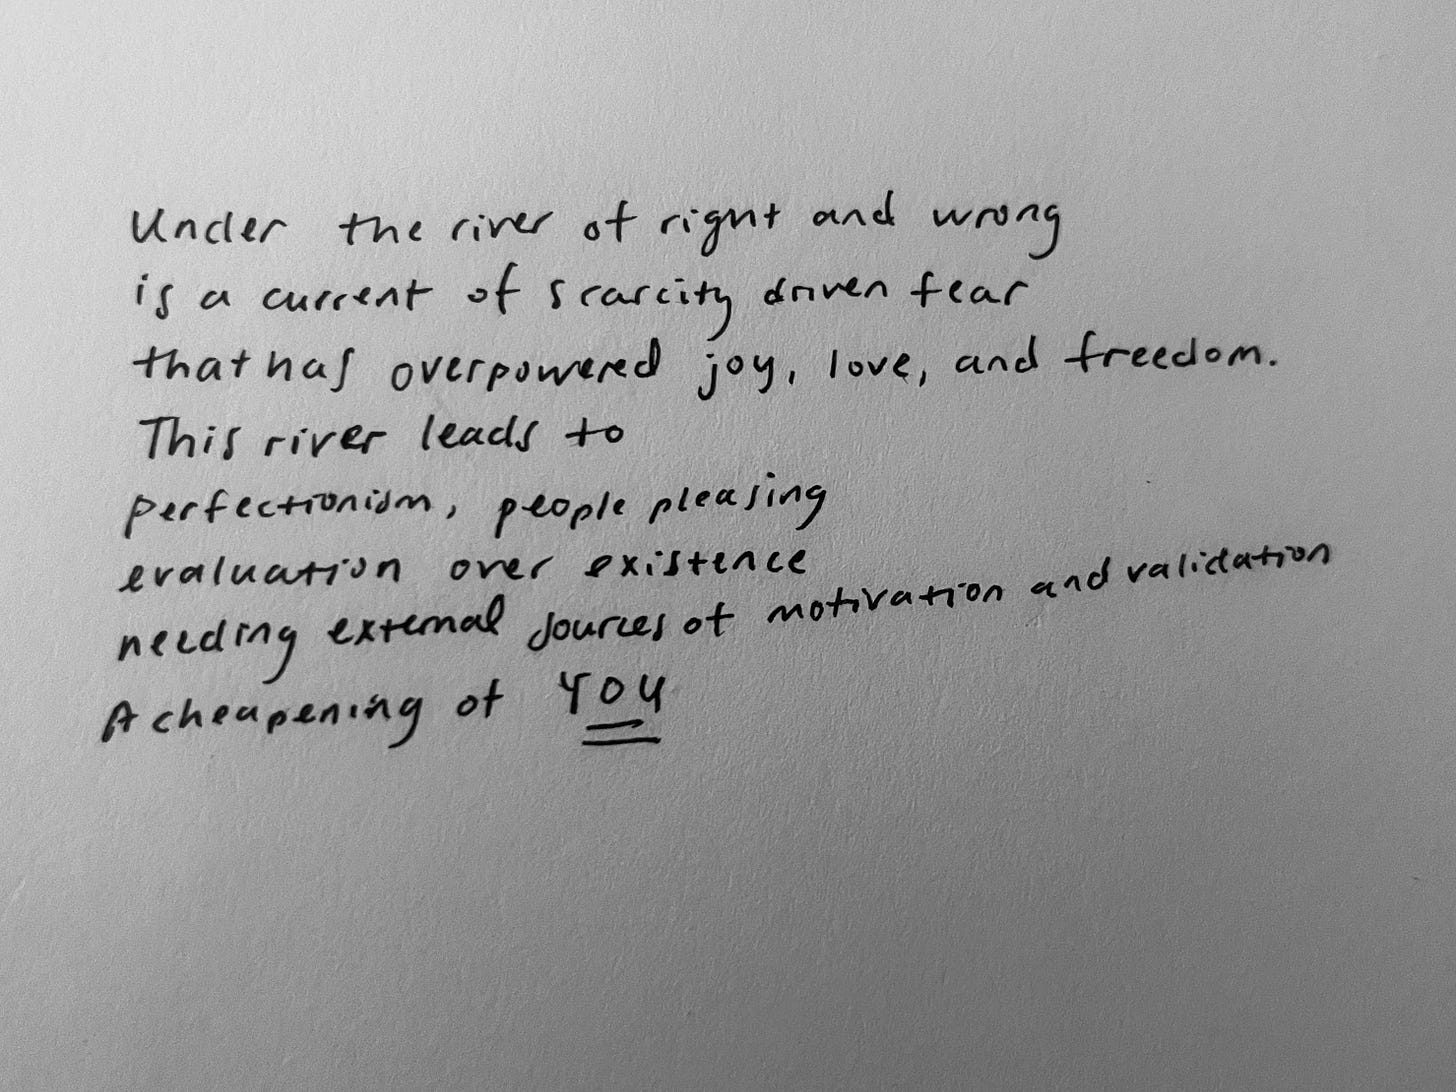 a black and white photo of the following poem: Under the river of right and wrong is a current of scarcity driven fear  that has overpowered joy, love, and freedom.  This river leads to  perfectionism, people pleasing evaluation over existence external sources of motivation and validation a cheapening of you